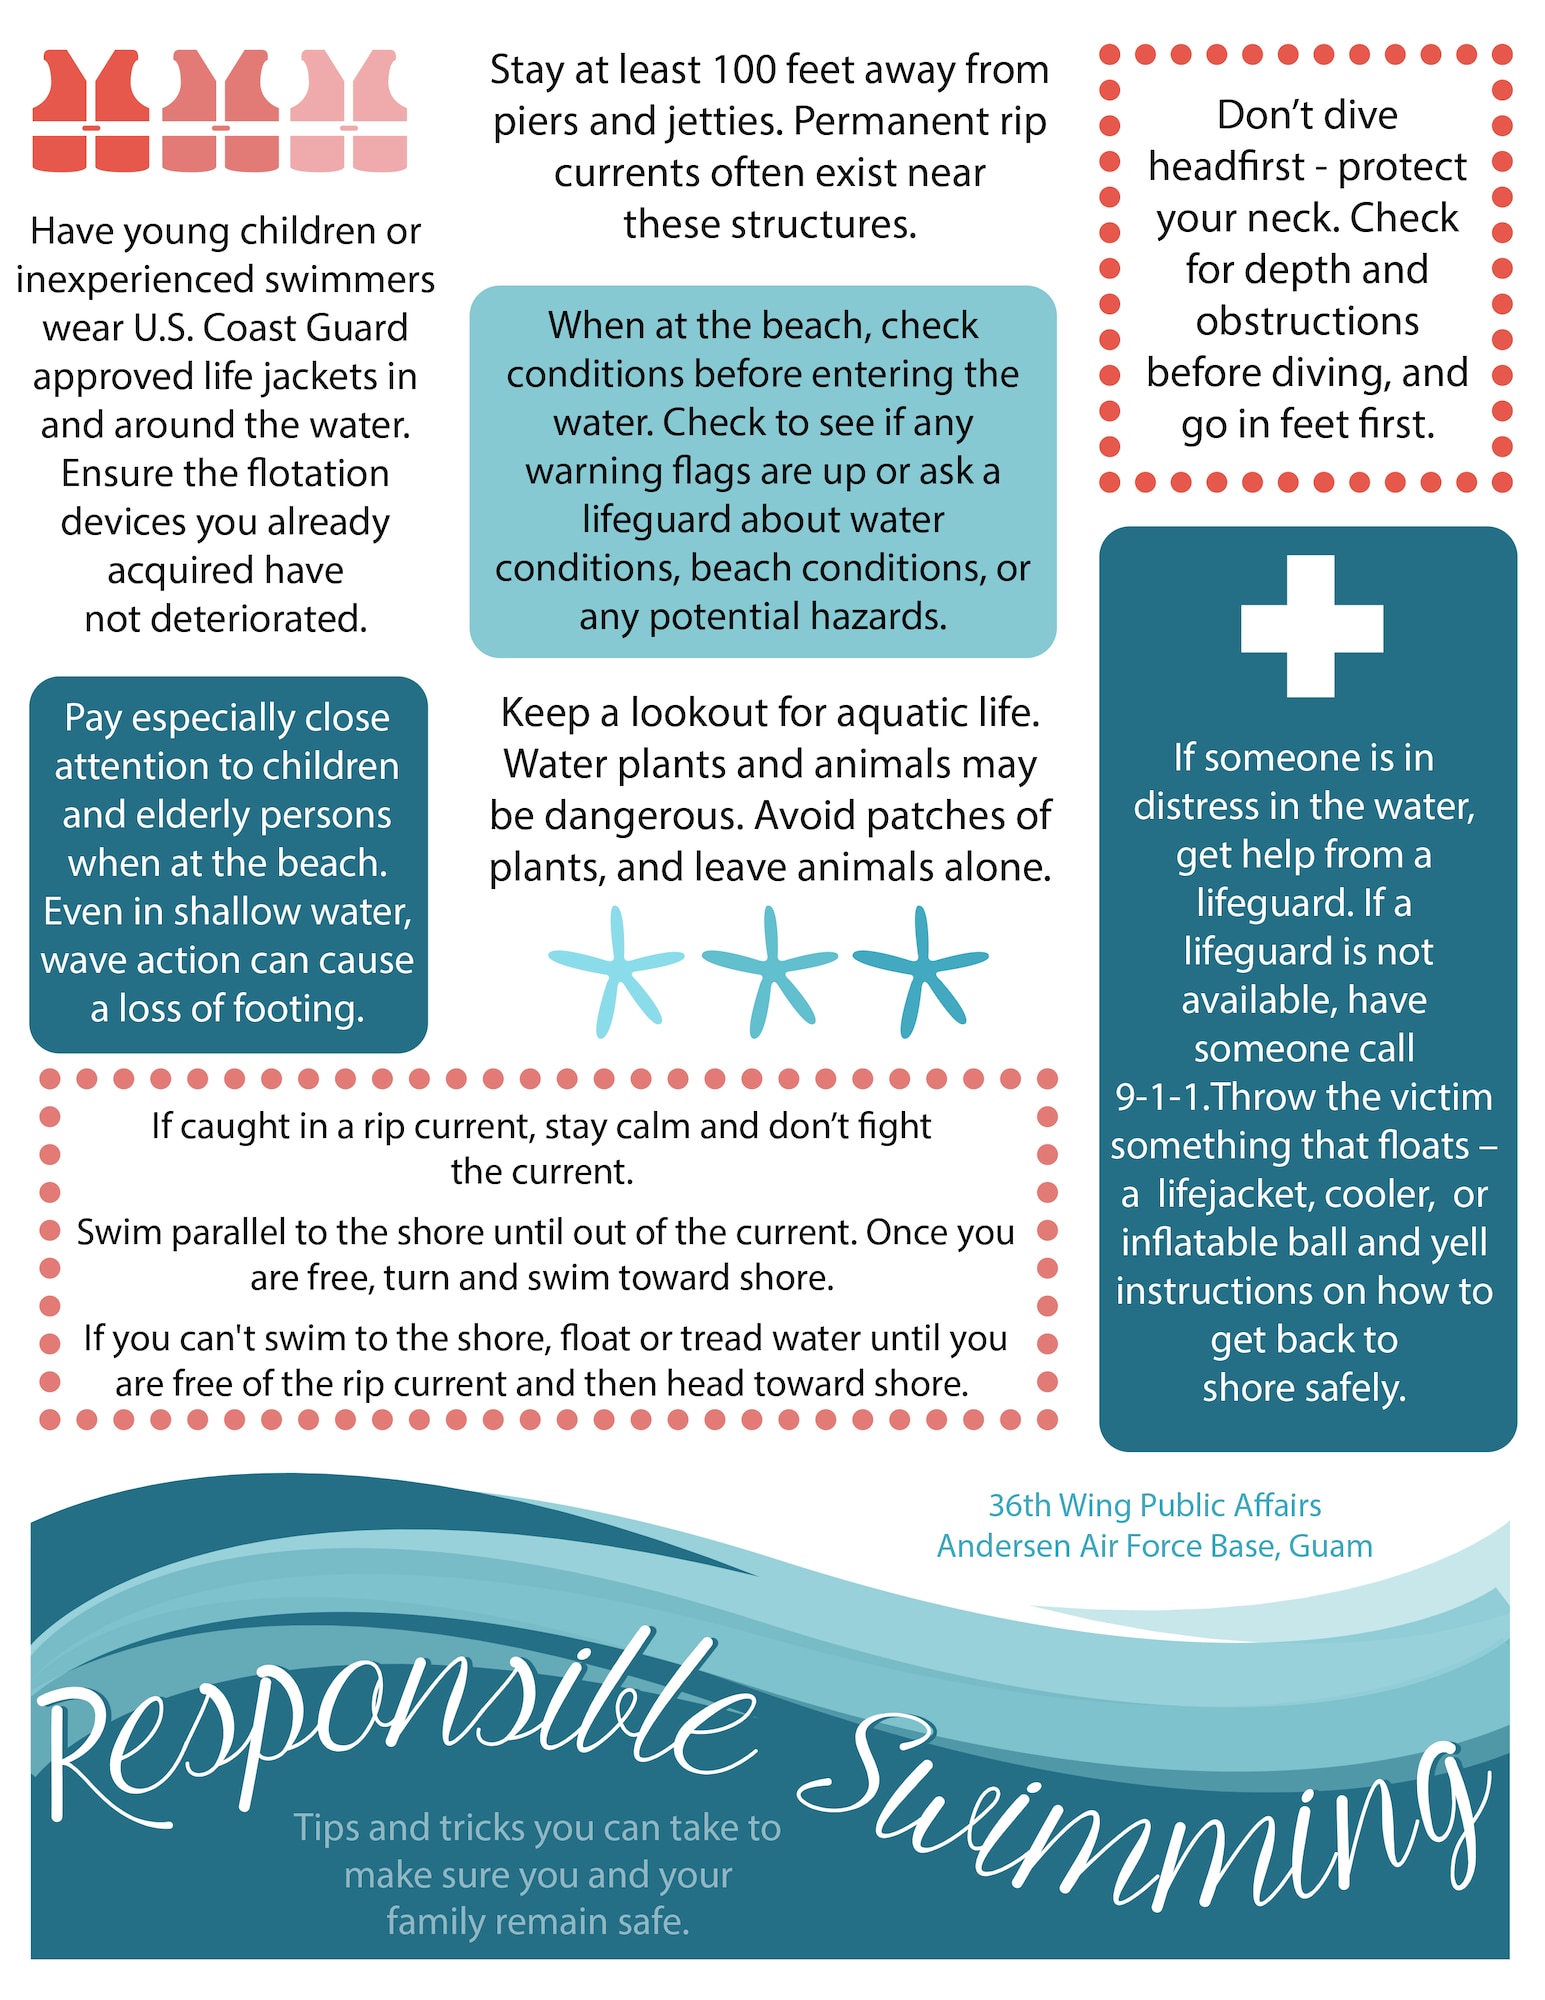 Responsible Swimming Infographic 